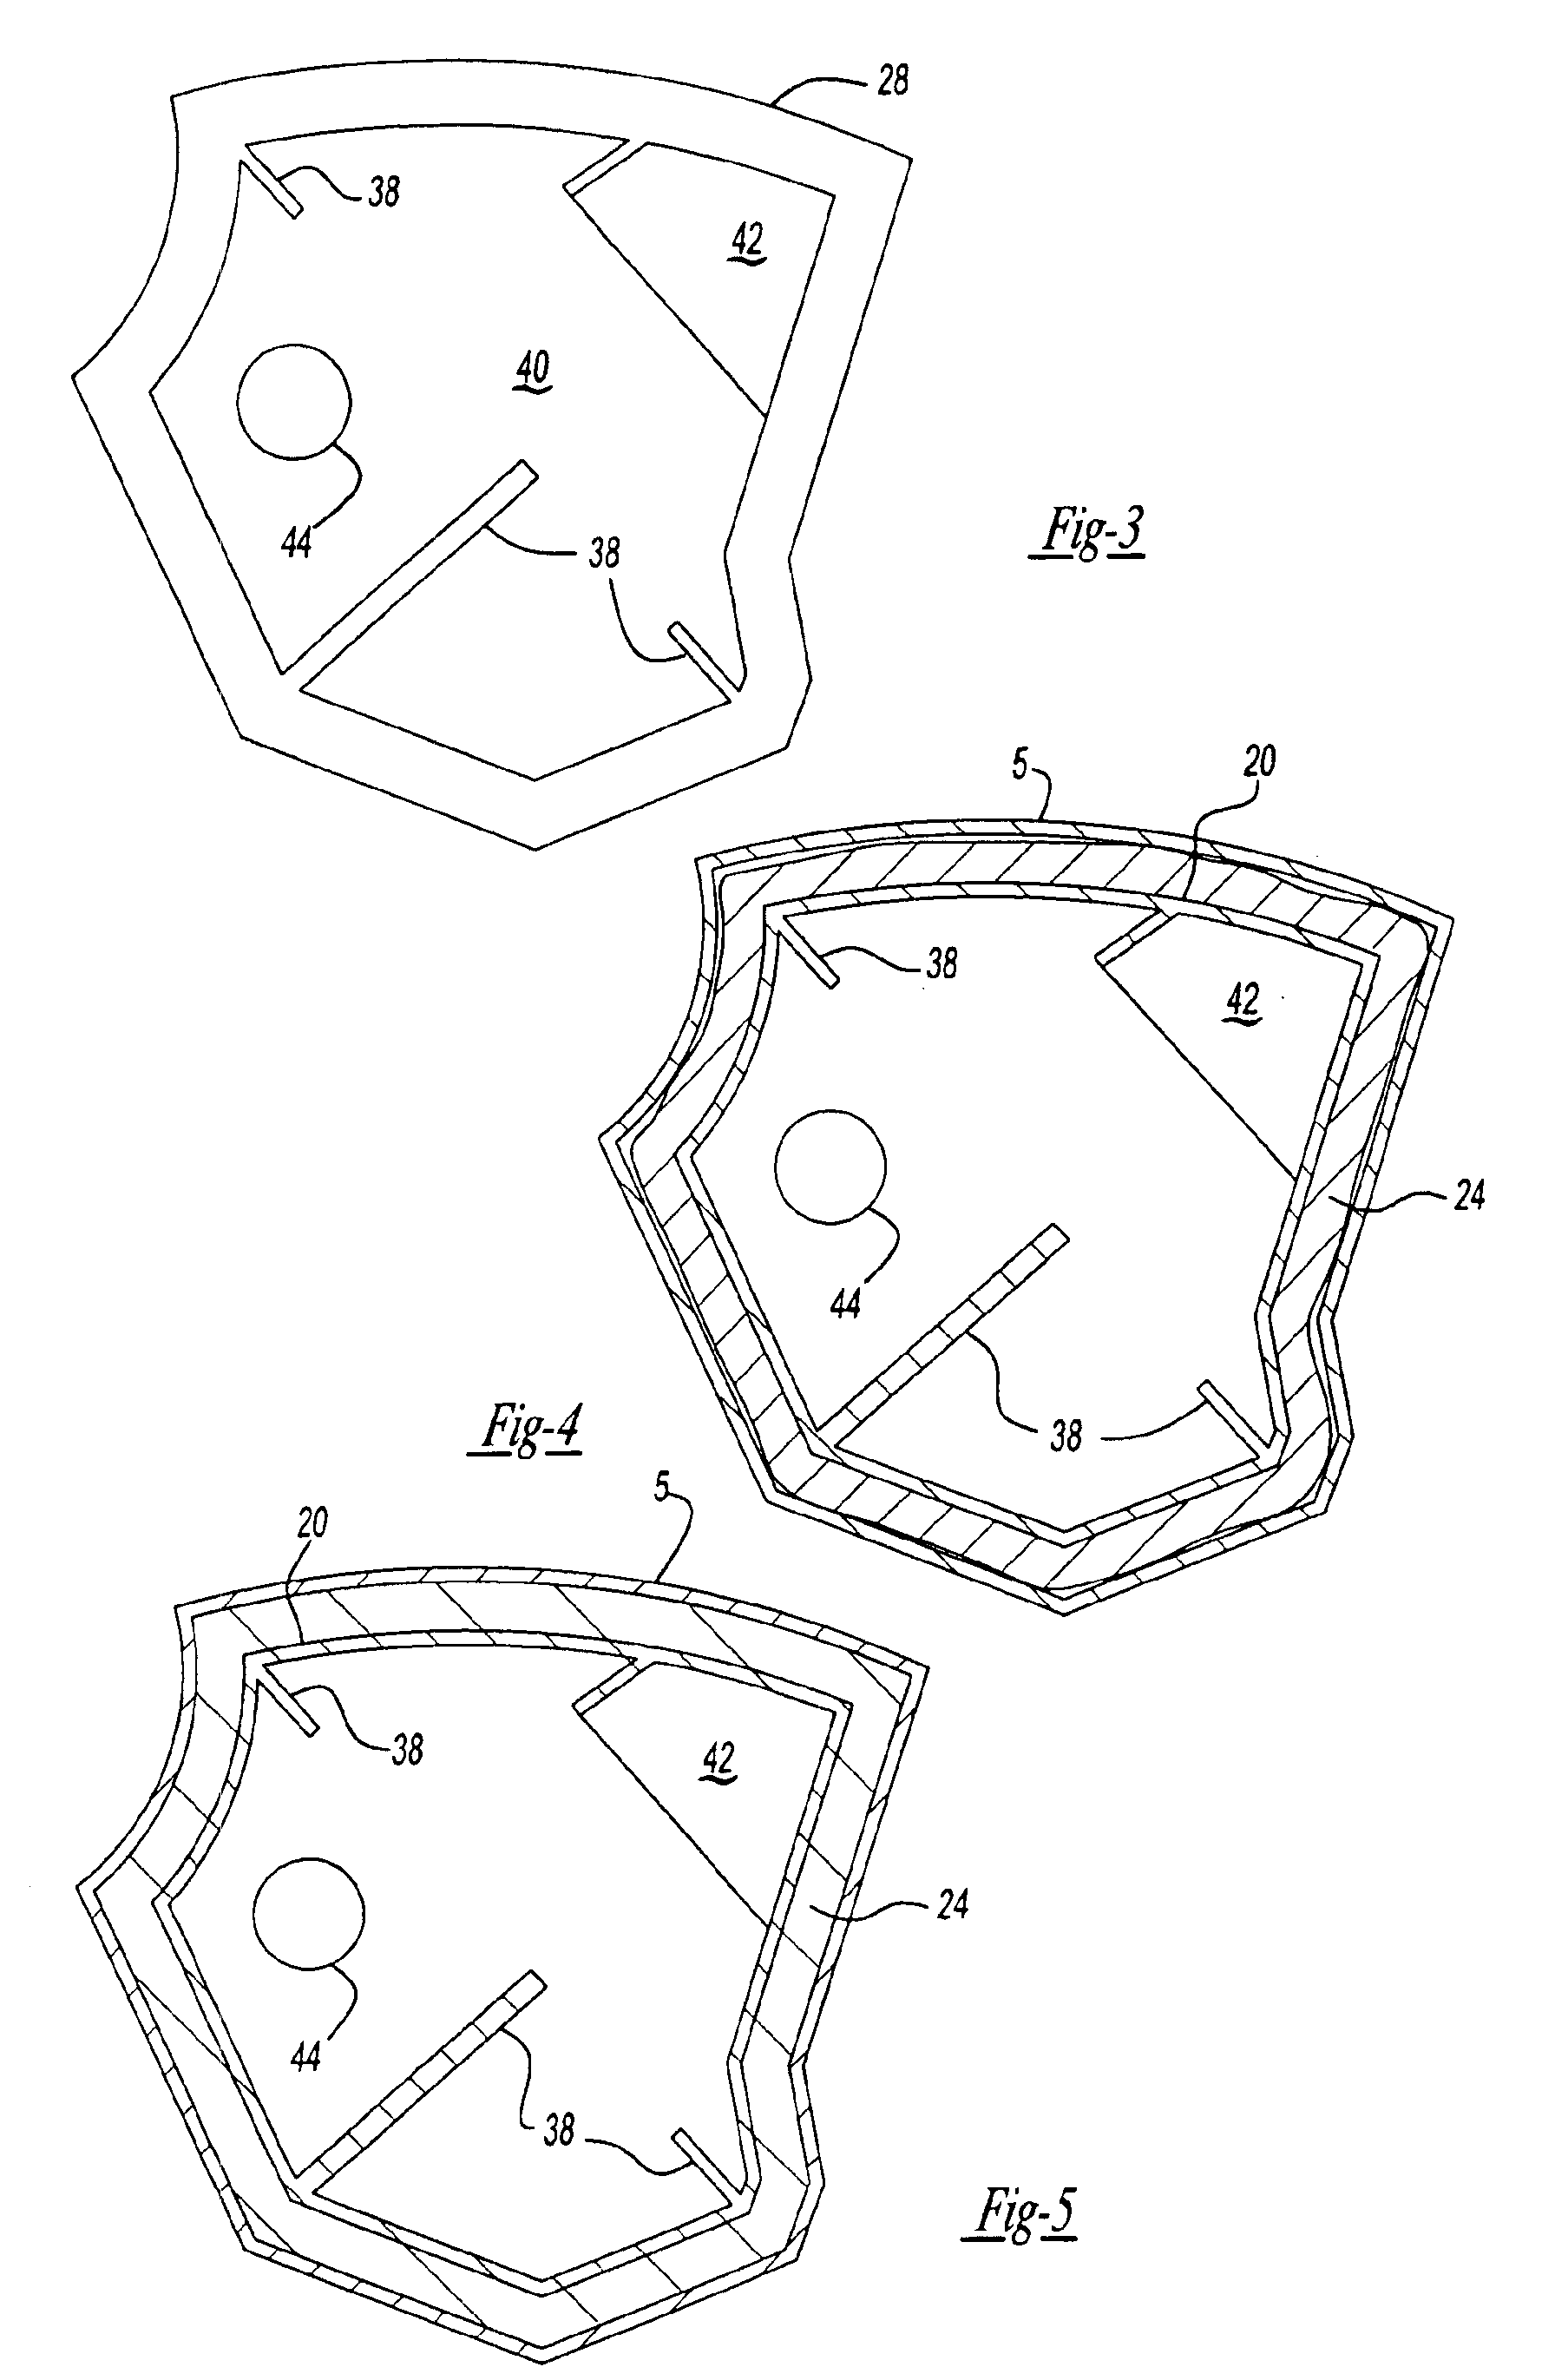 Method of reinforcing an automobile structure